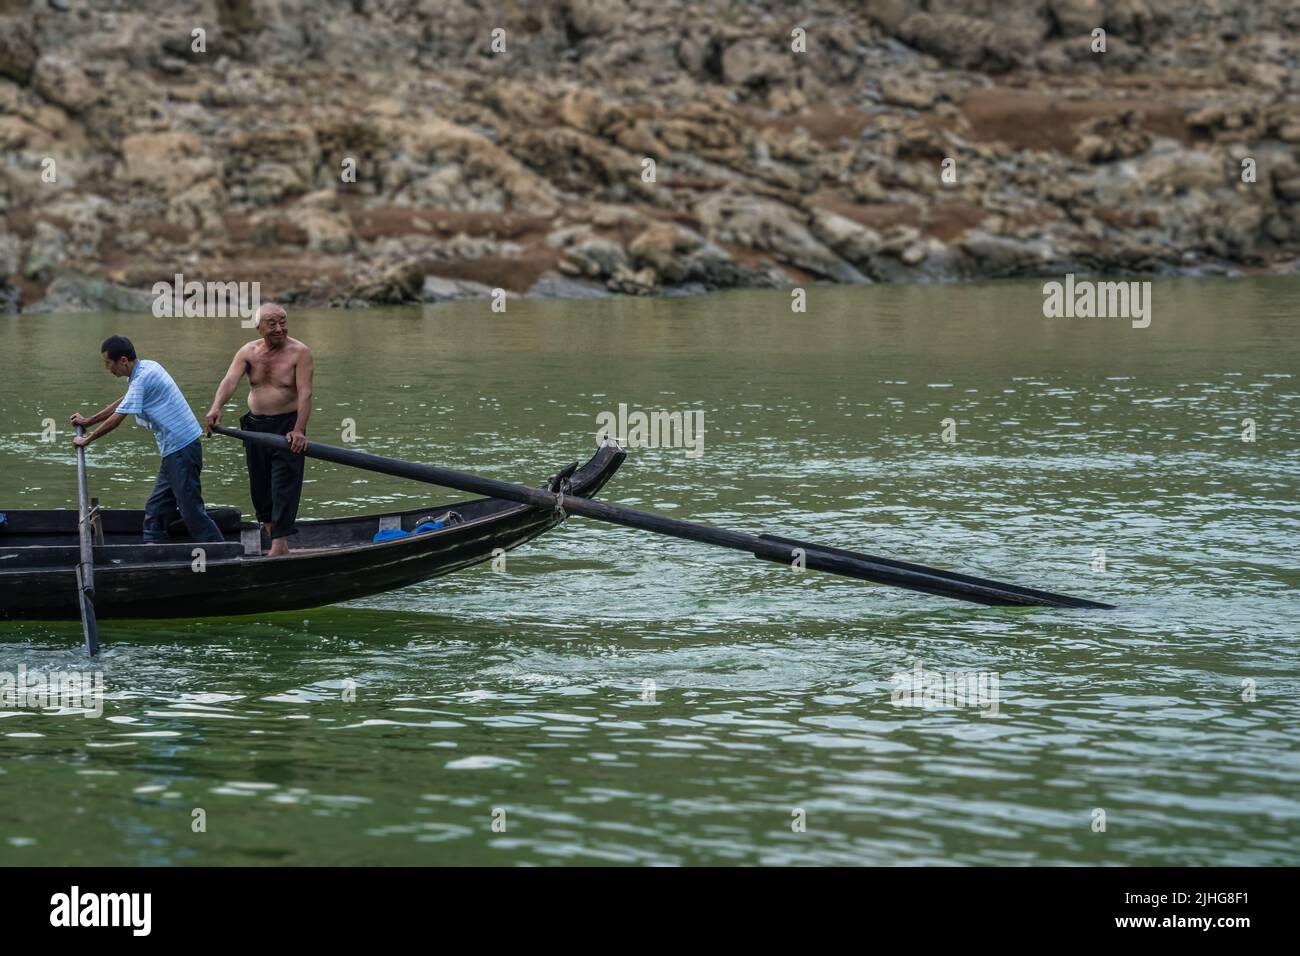 Yangtze River, China - August 2019 : Men catching fish from a small crowded fisherman boats on the Shennong Xi Stream, estuary of the mighty Yangtze r Stock Photo